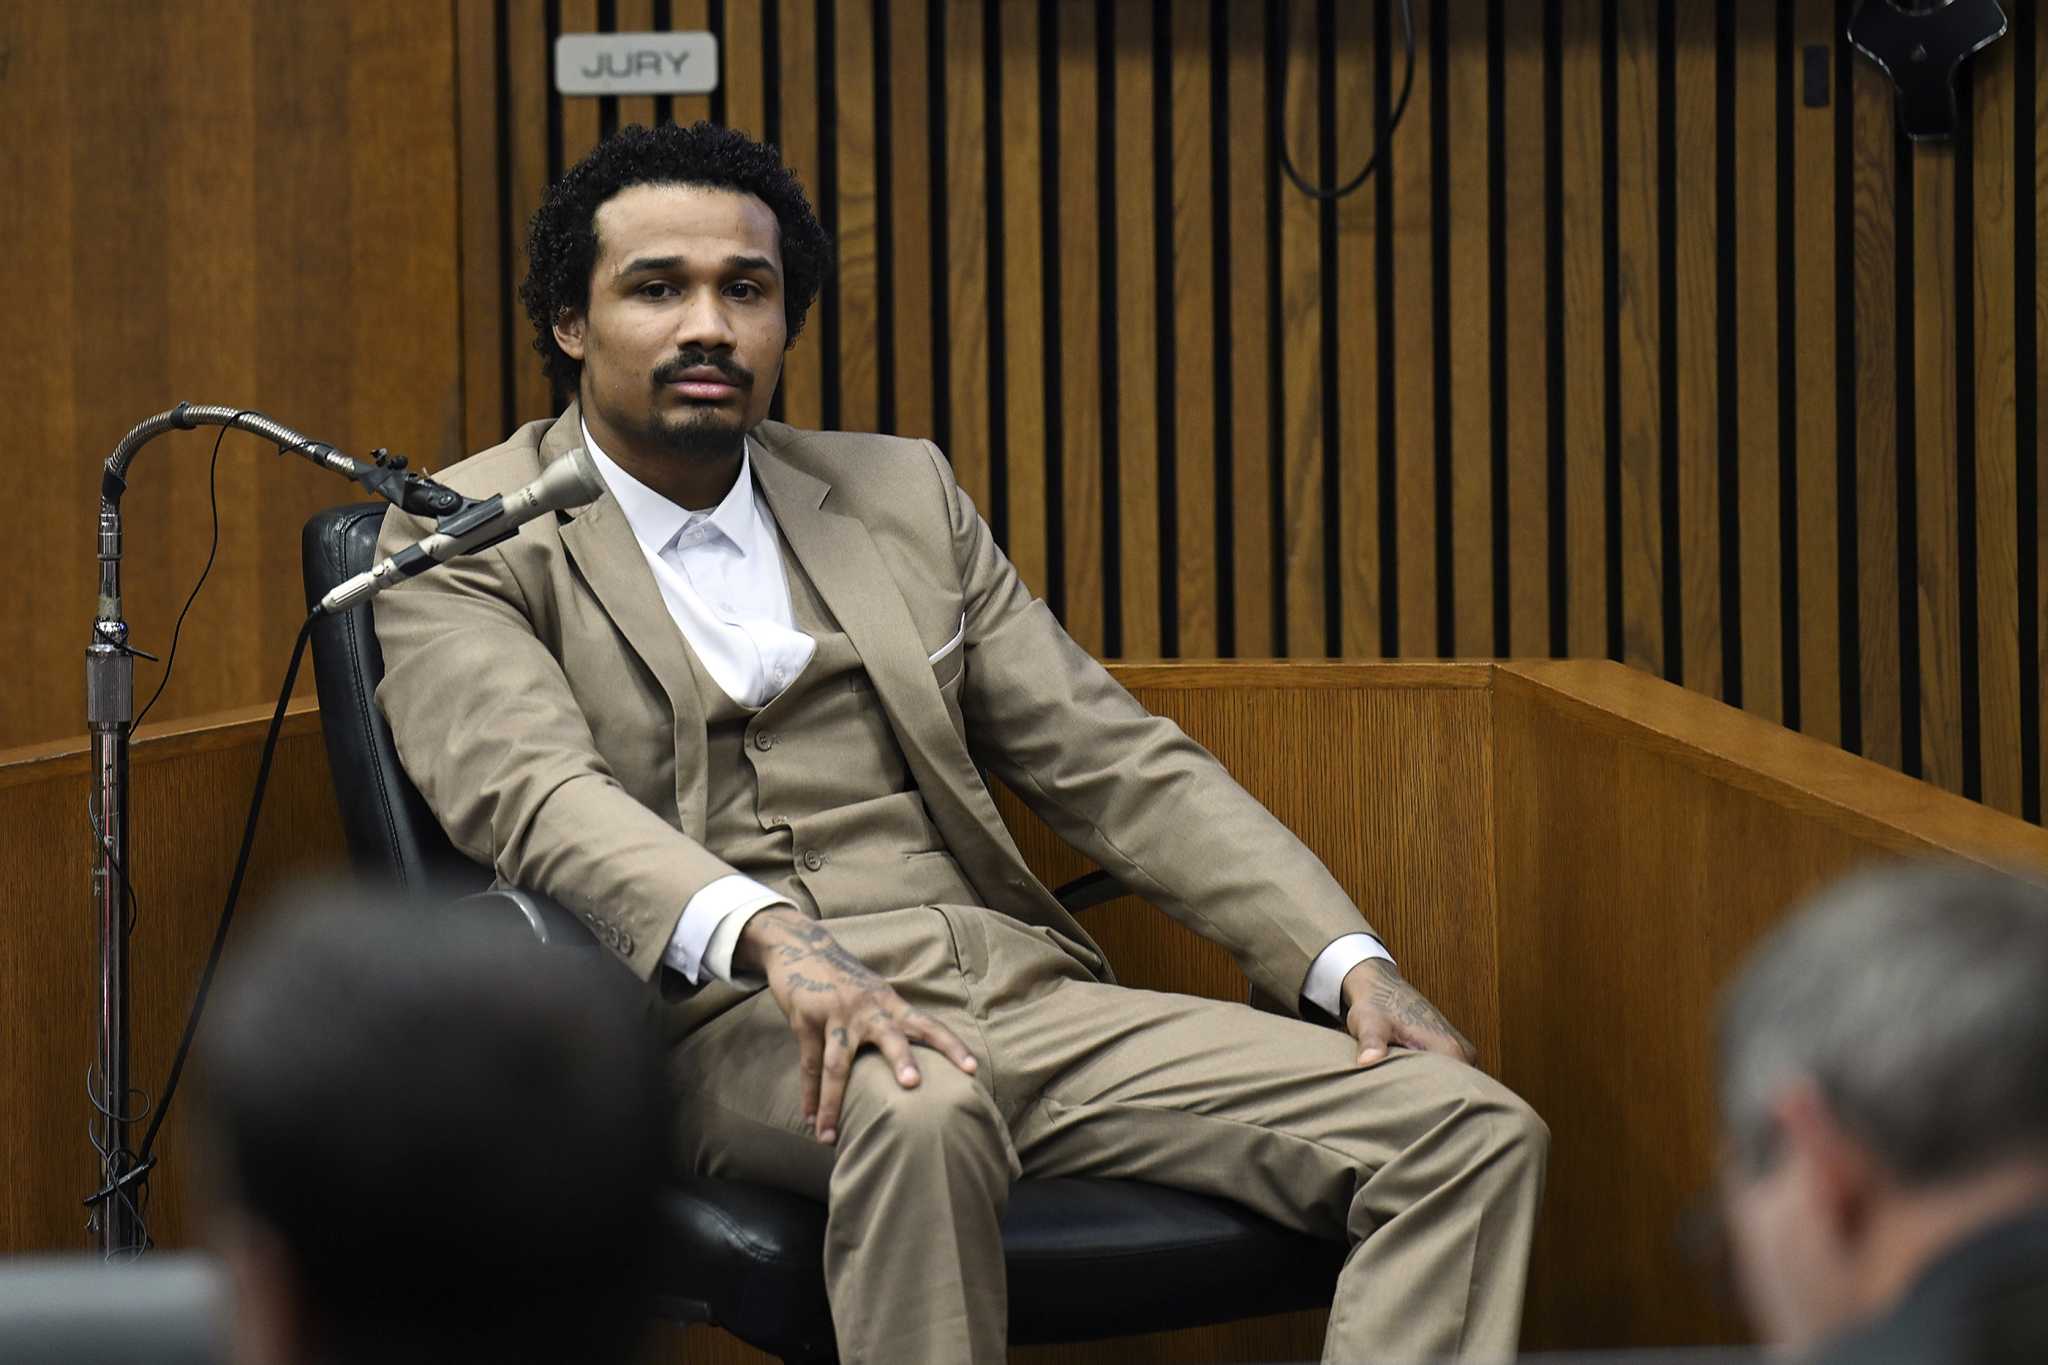 Man cleared of premeditated murder in Detroit synagogue leader's death but could face 2nd trial